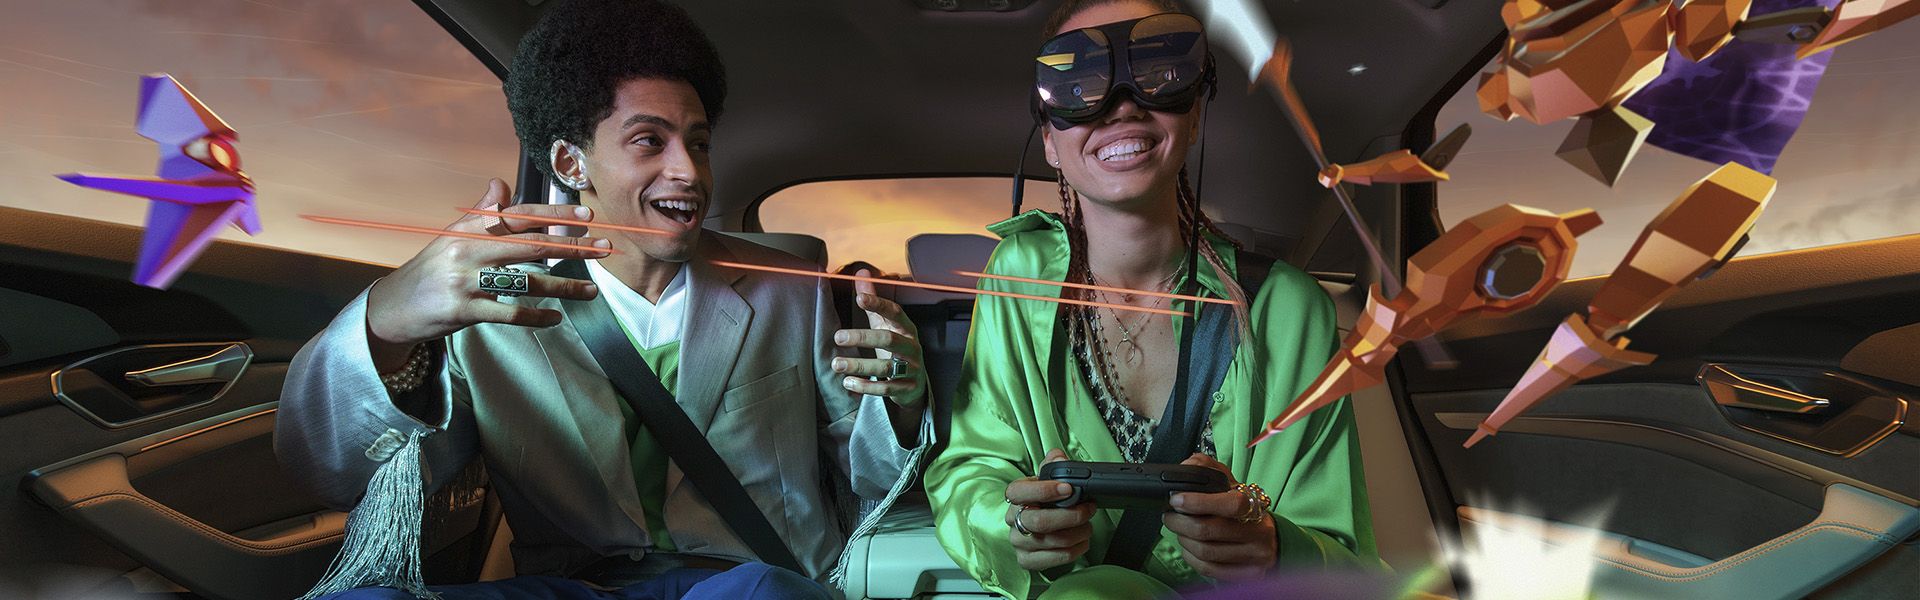 Two people sit in the car and try out virtual reality